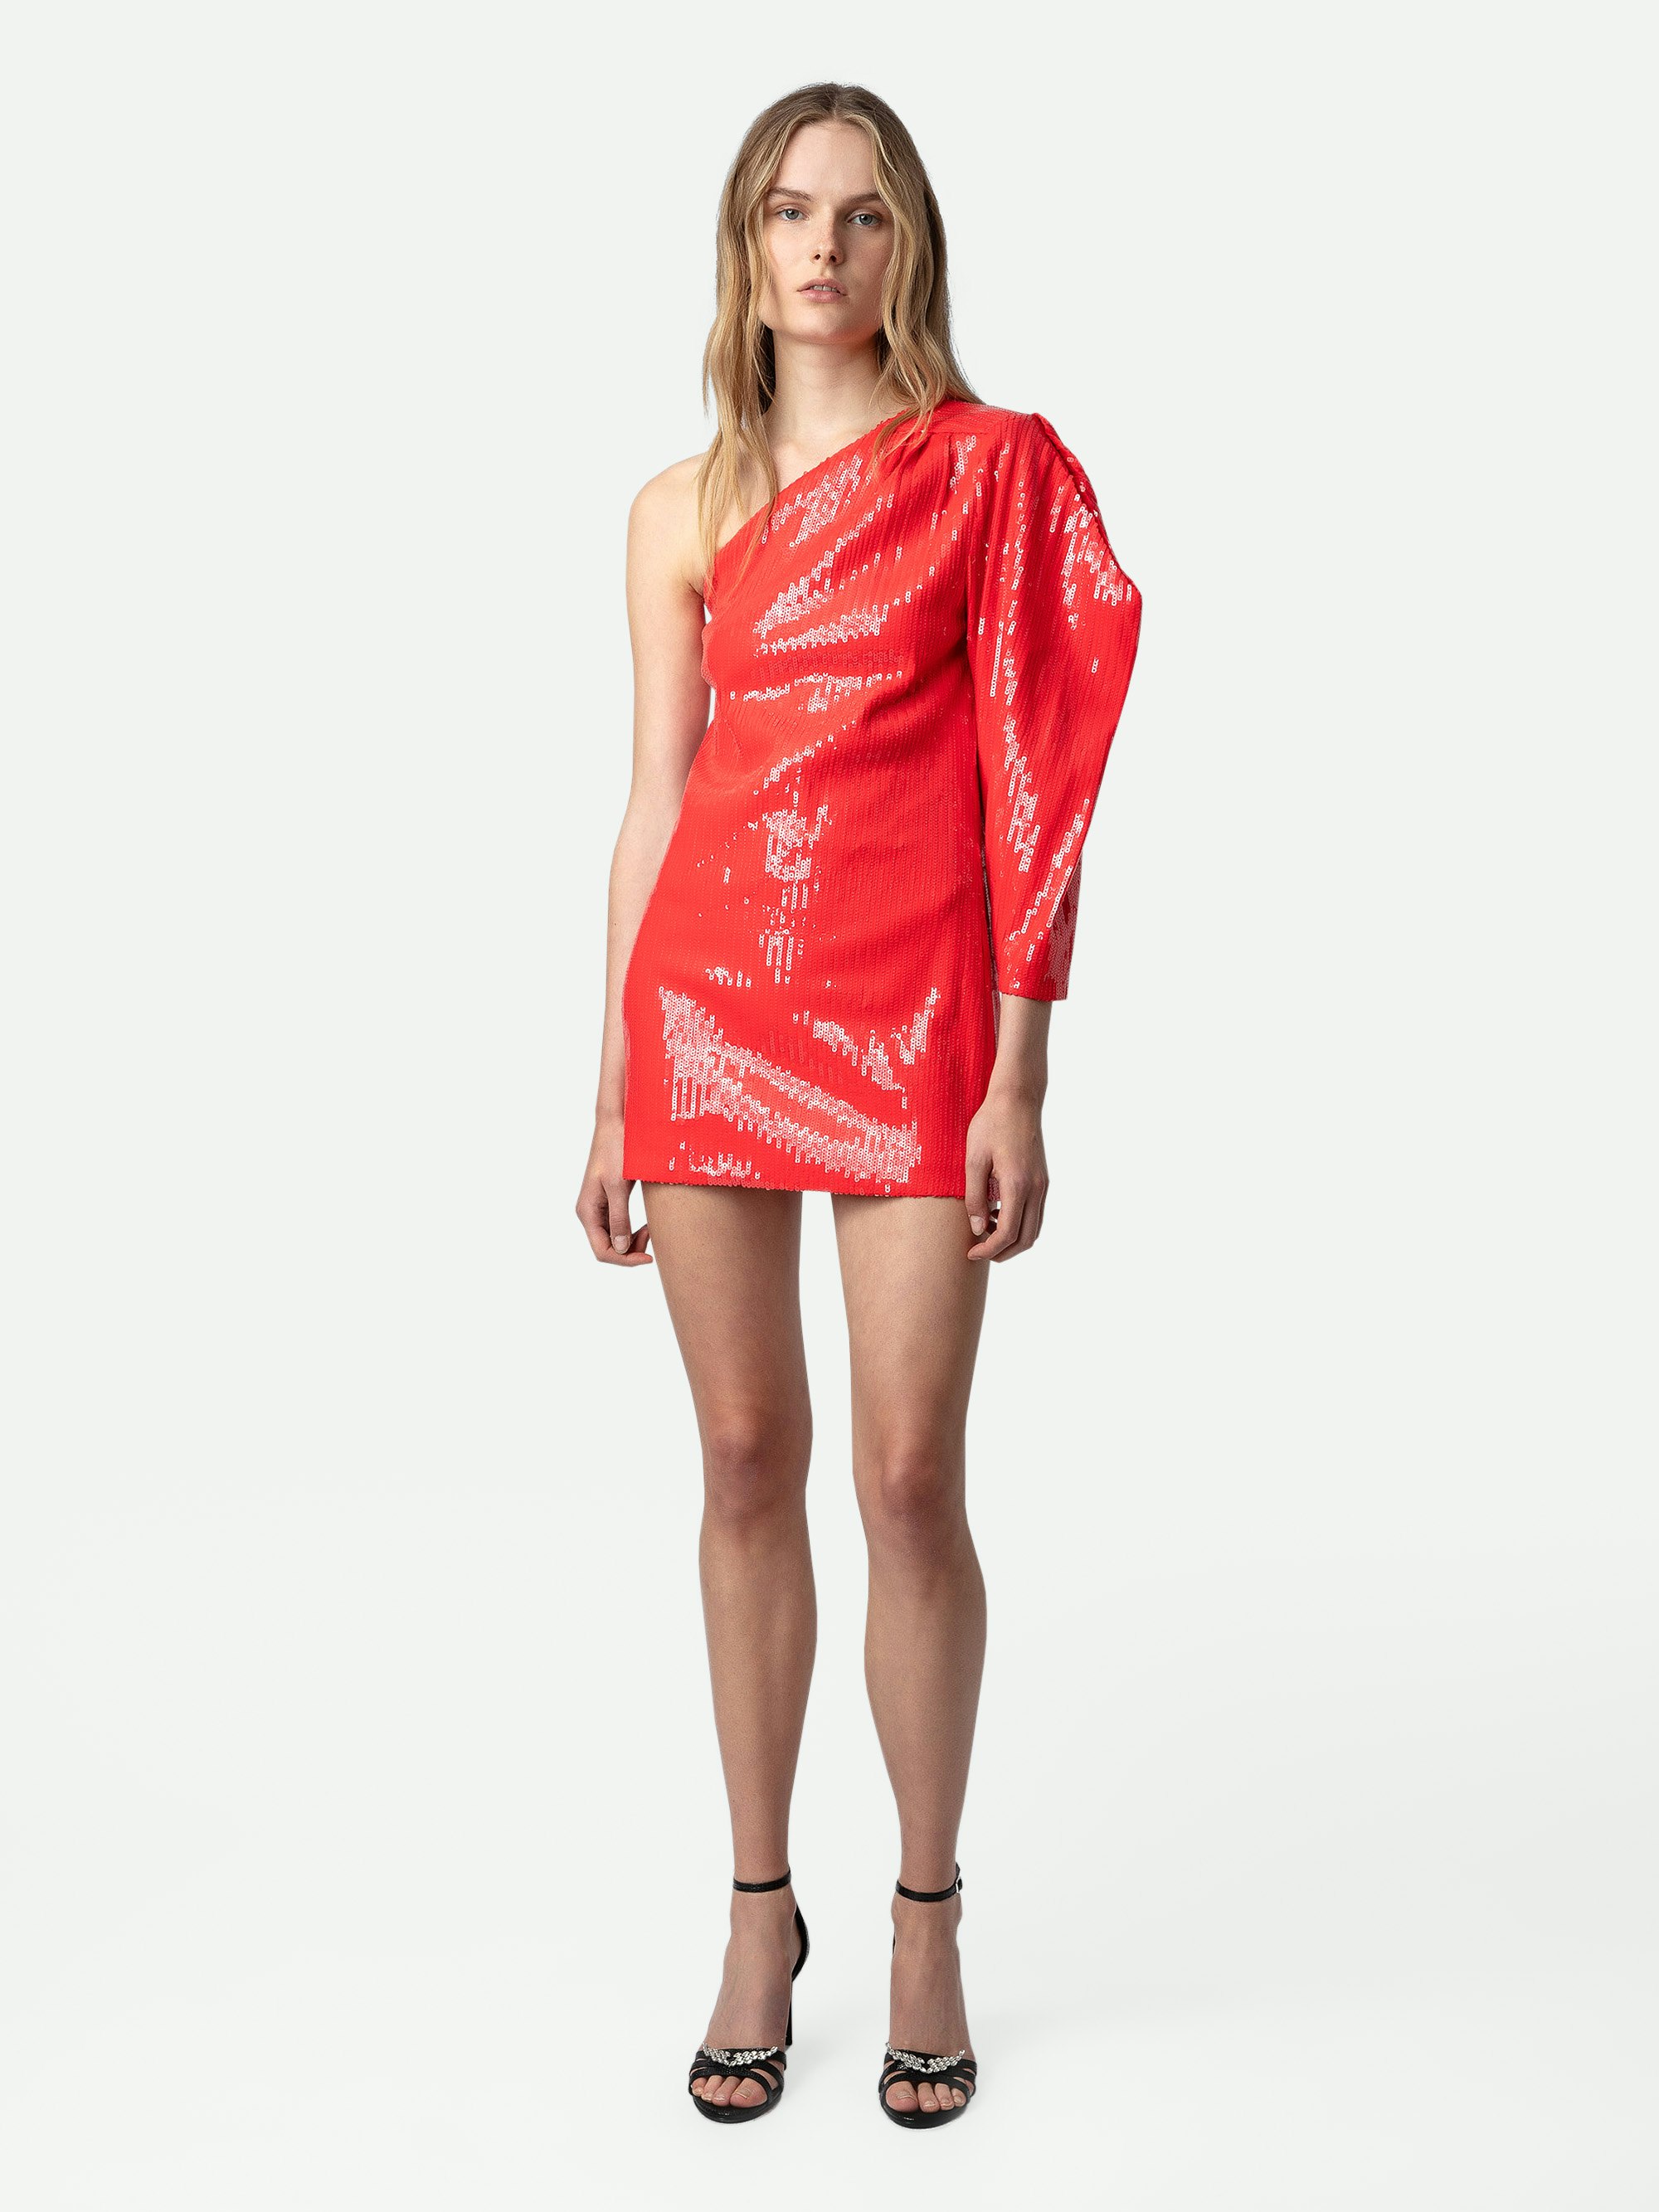 Roely Sequin Dress - Short red sequin dress with draped asymmetric sleeve.